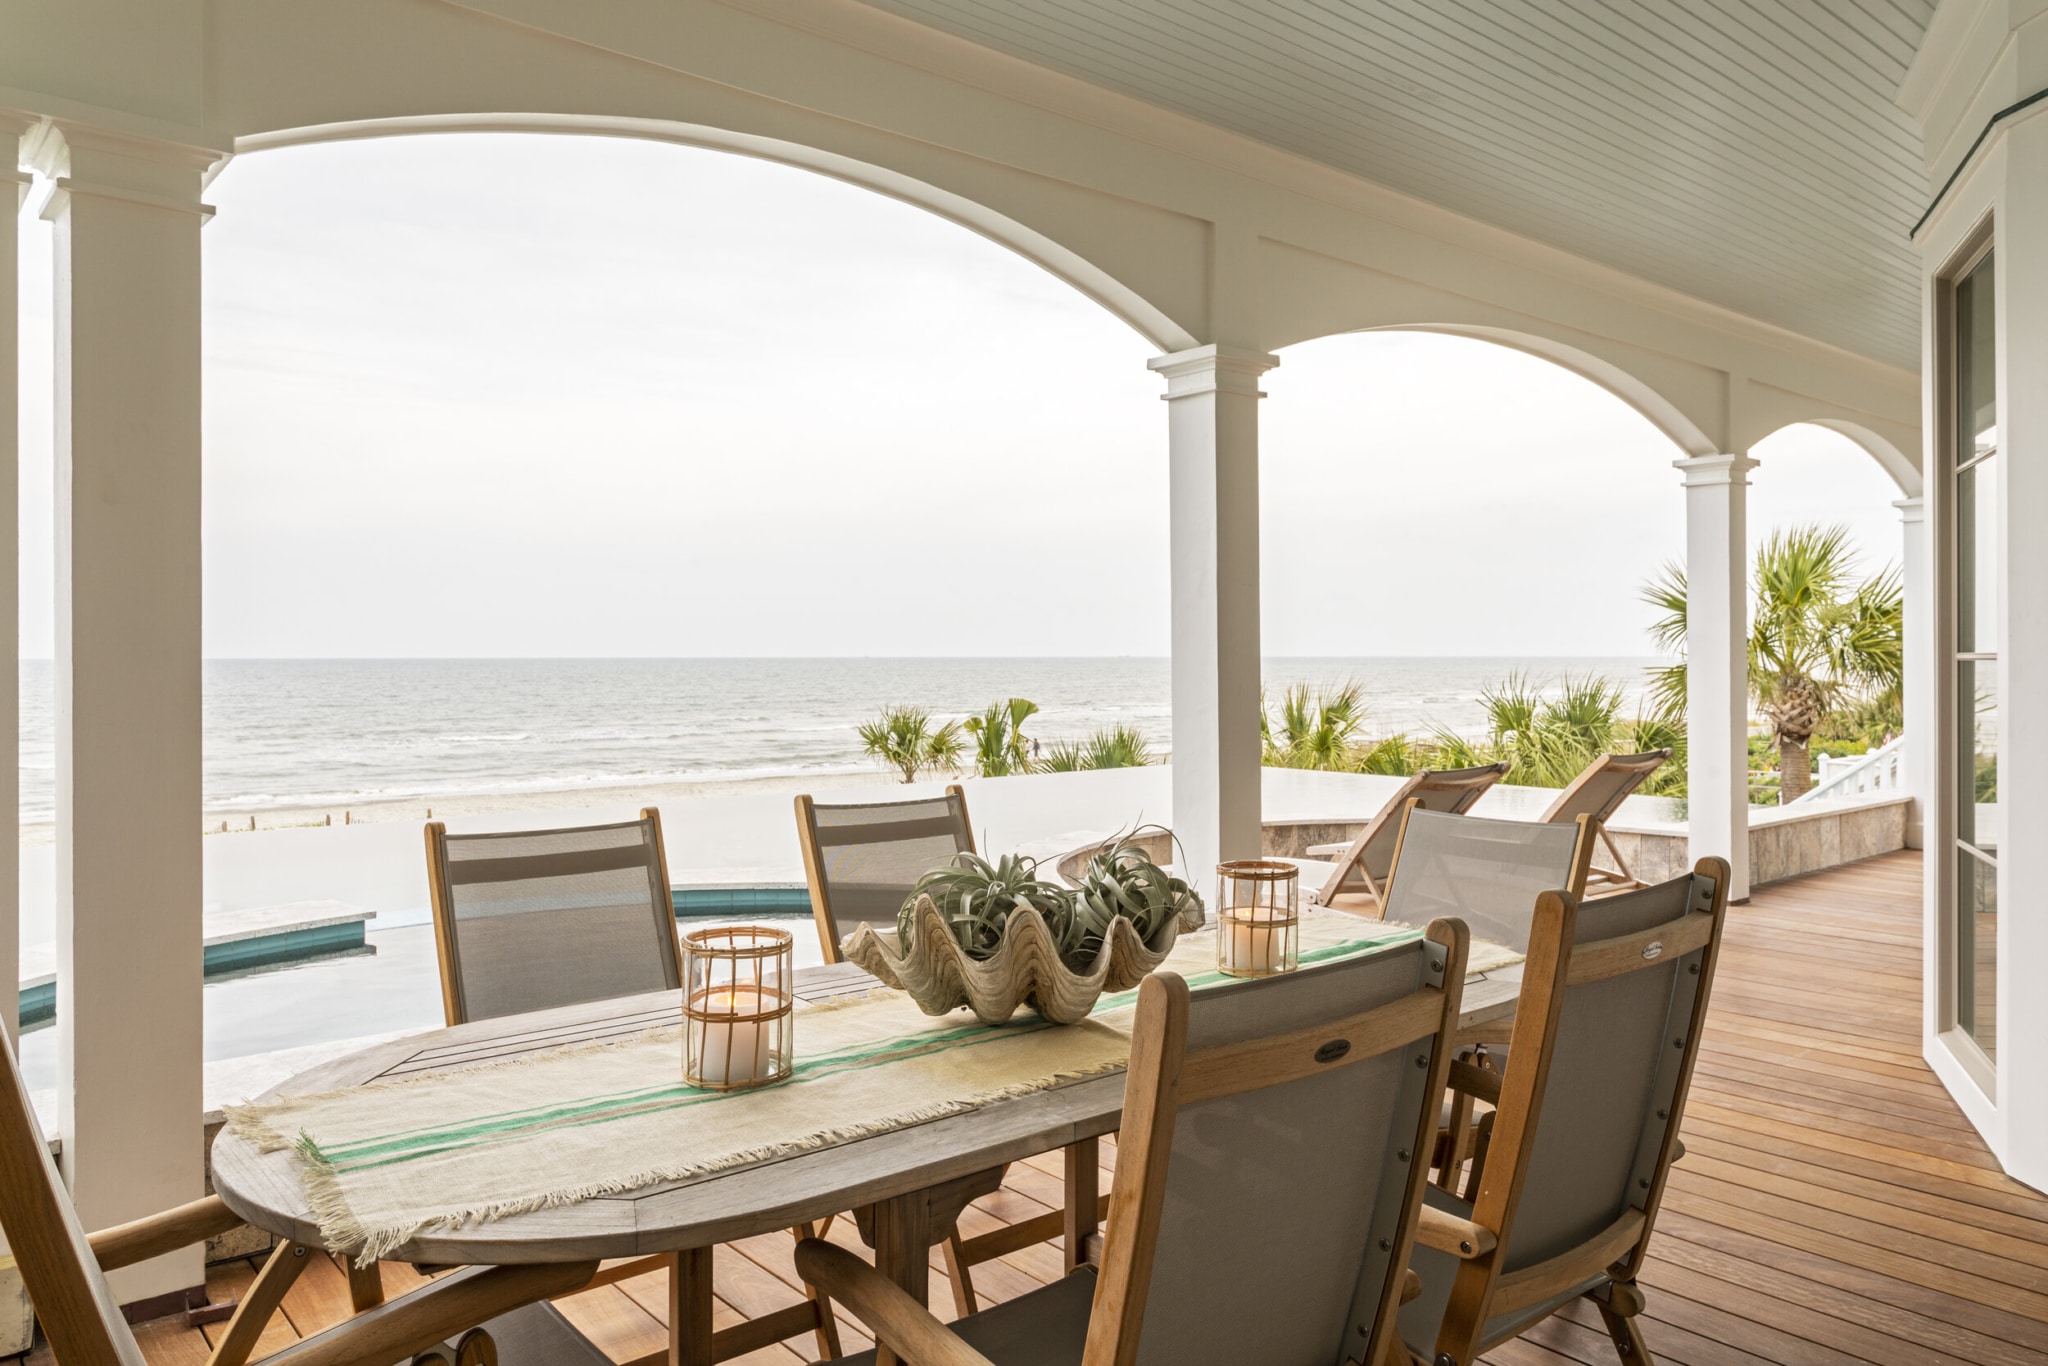 Isle of Palms house tour - Allison Elebash - Julia Lynn Photography -porch - covered porch - dining - dining alfresco